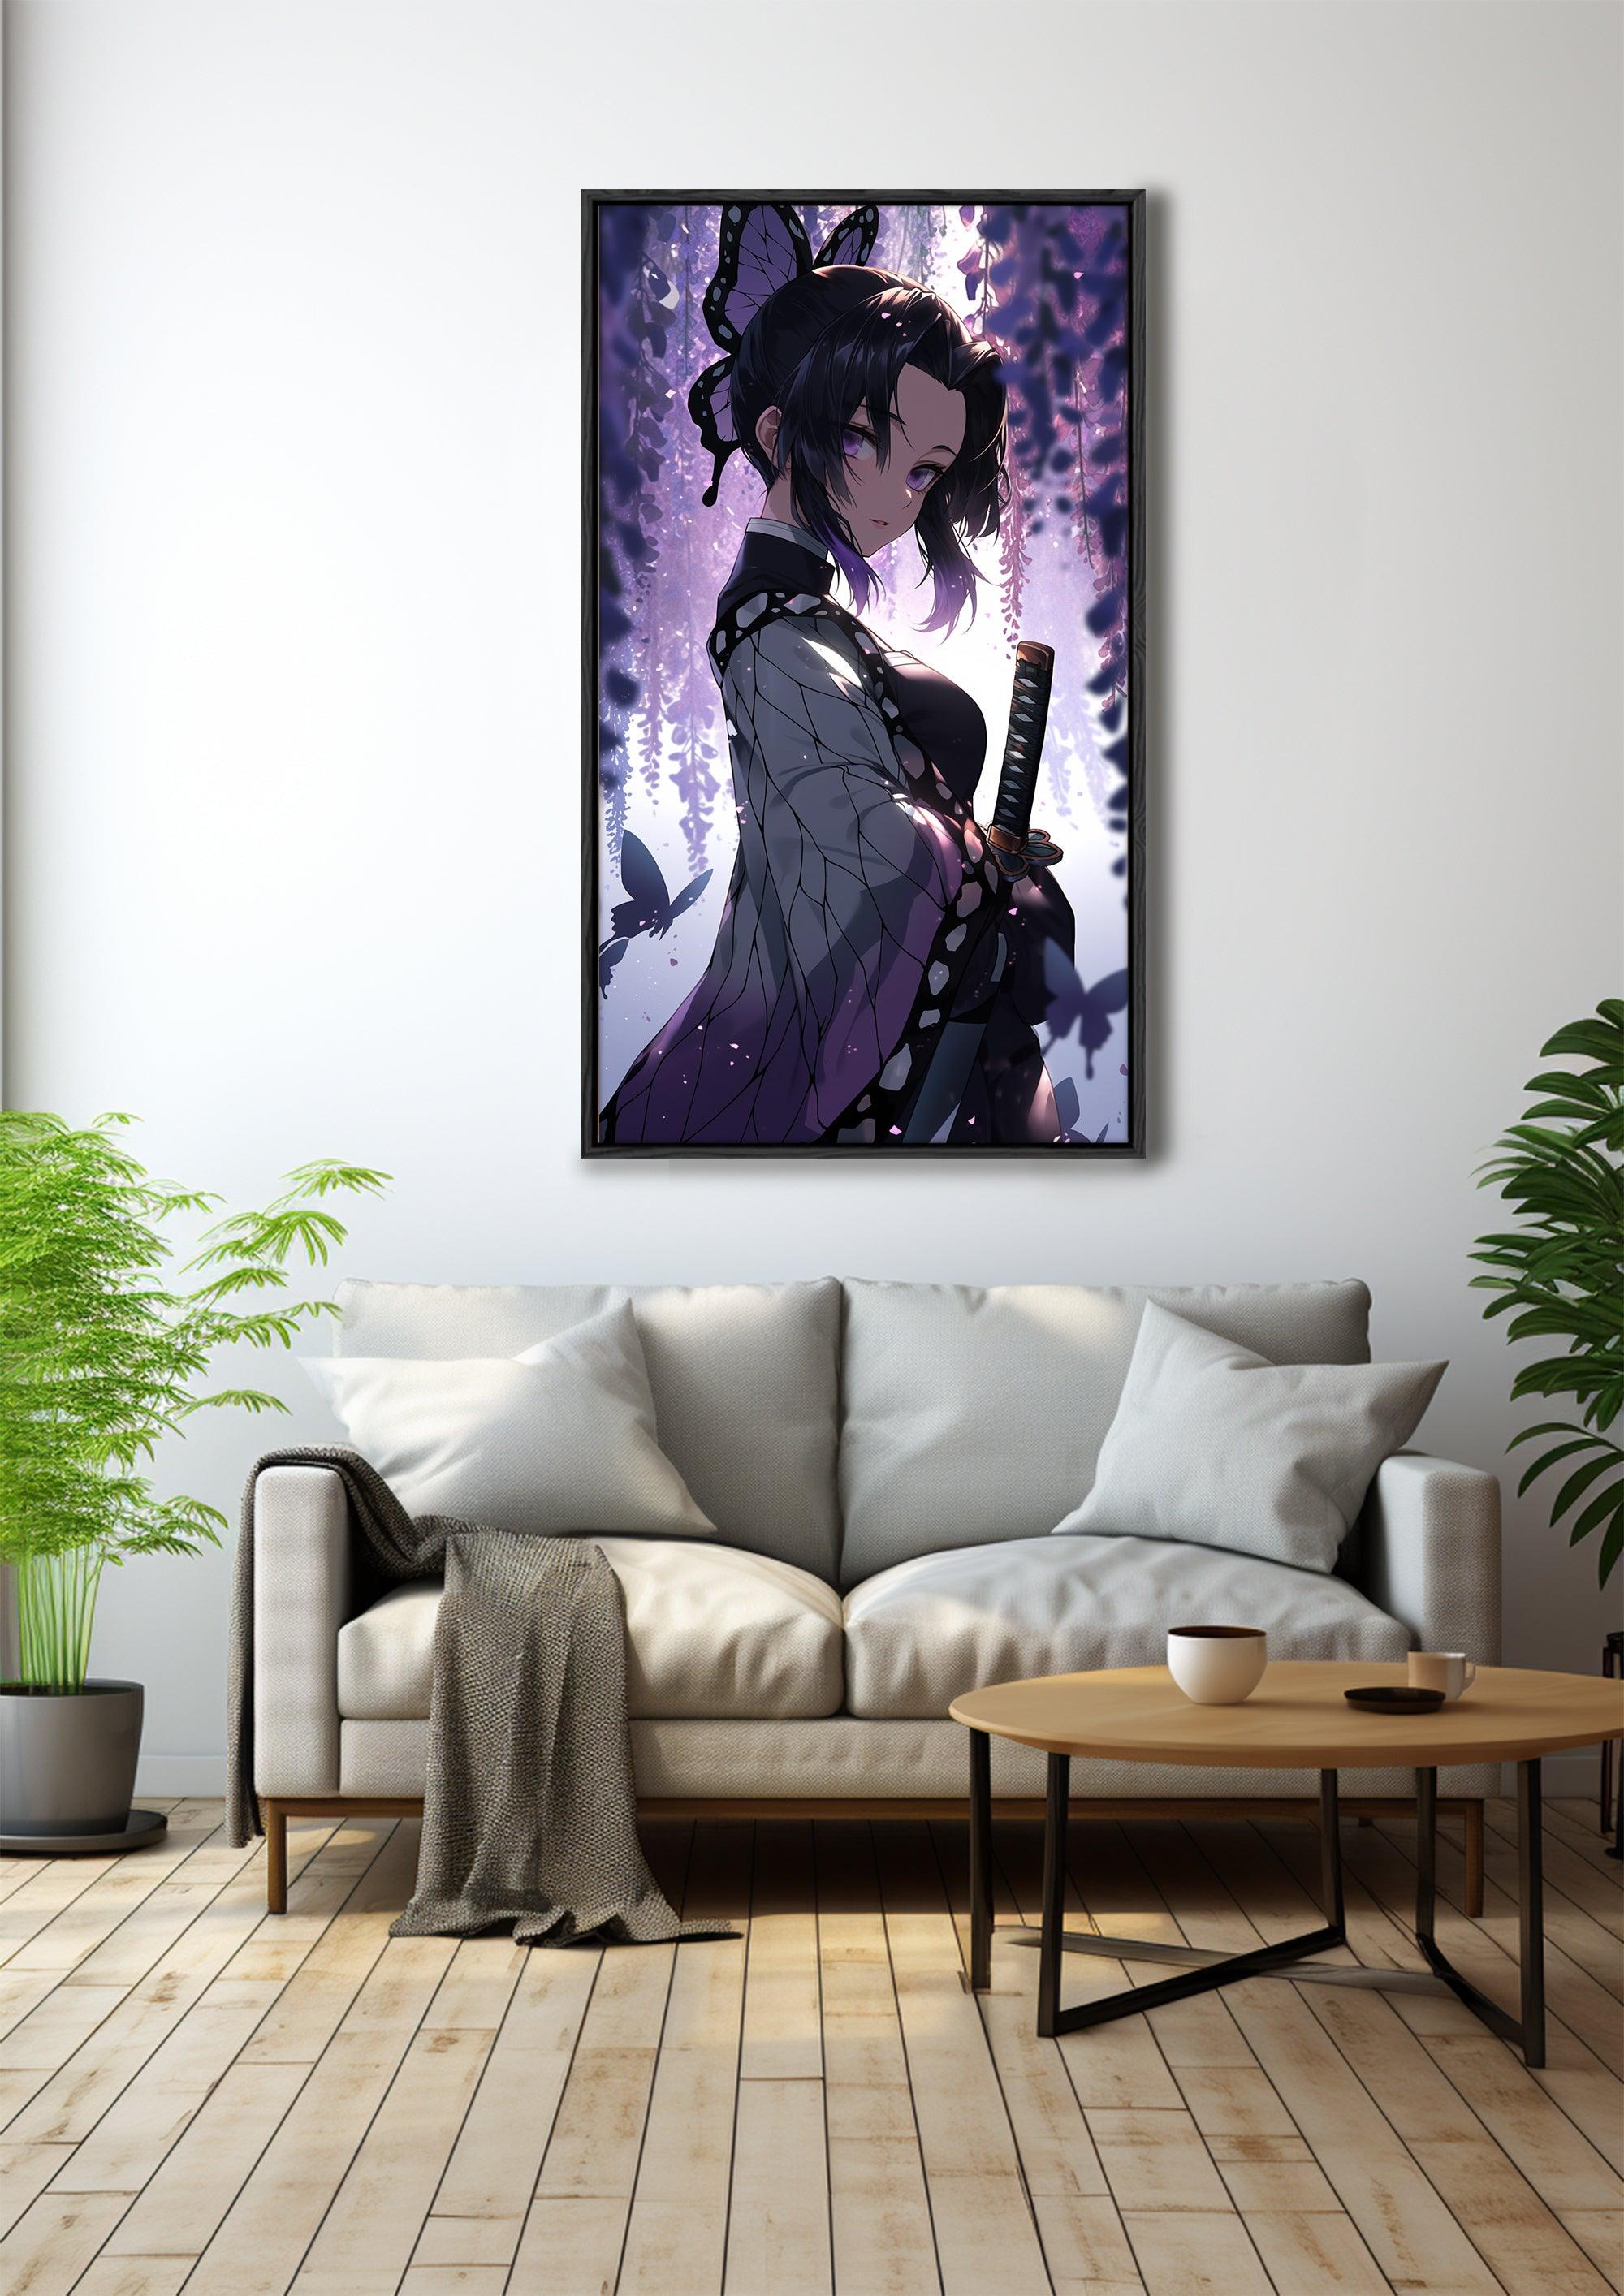 Anime Epic - Demon Slayer Character Concept - Dynamic Wall Art and Digital Wallpaper - Industrial Art Deco Gaming Room Decor